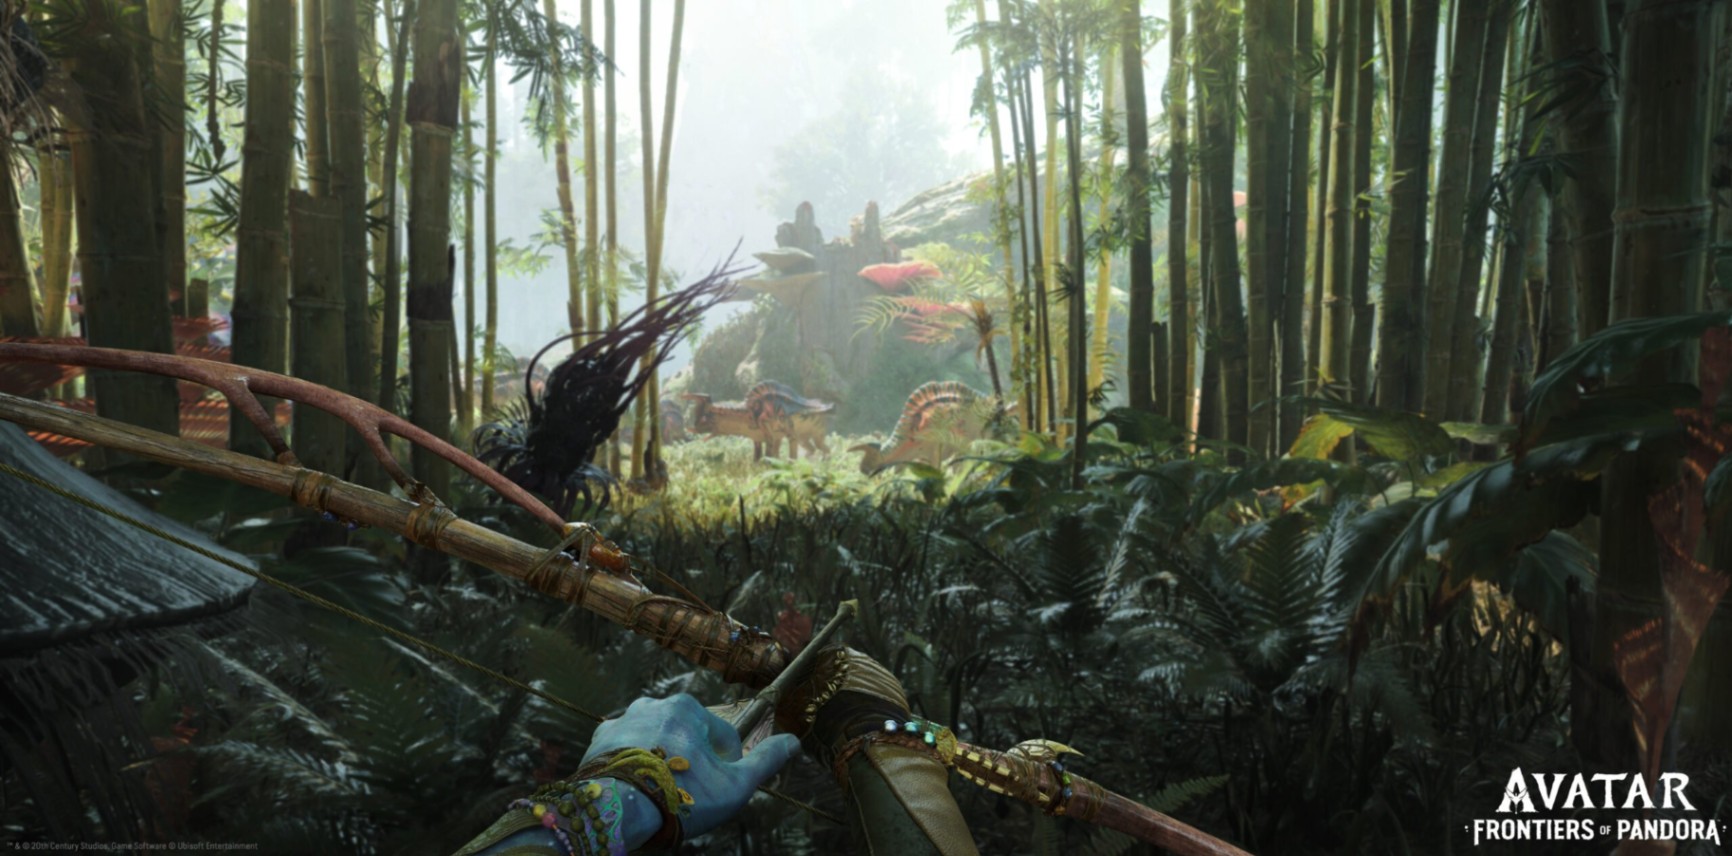 Discover the Avatar Video Game Here